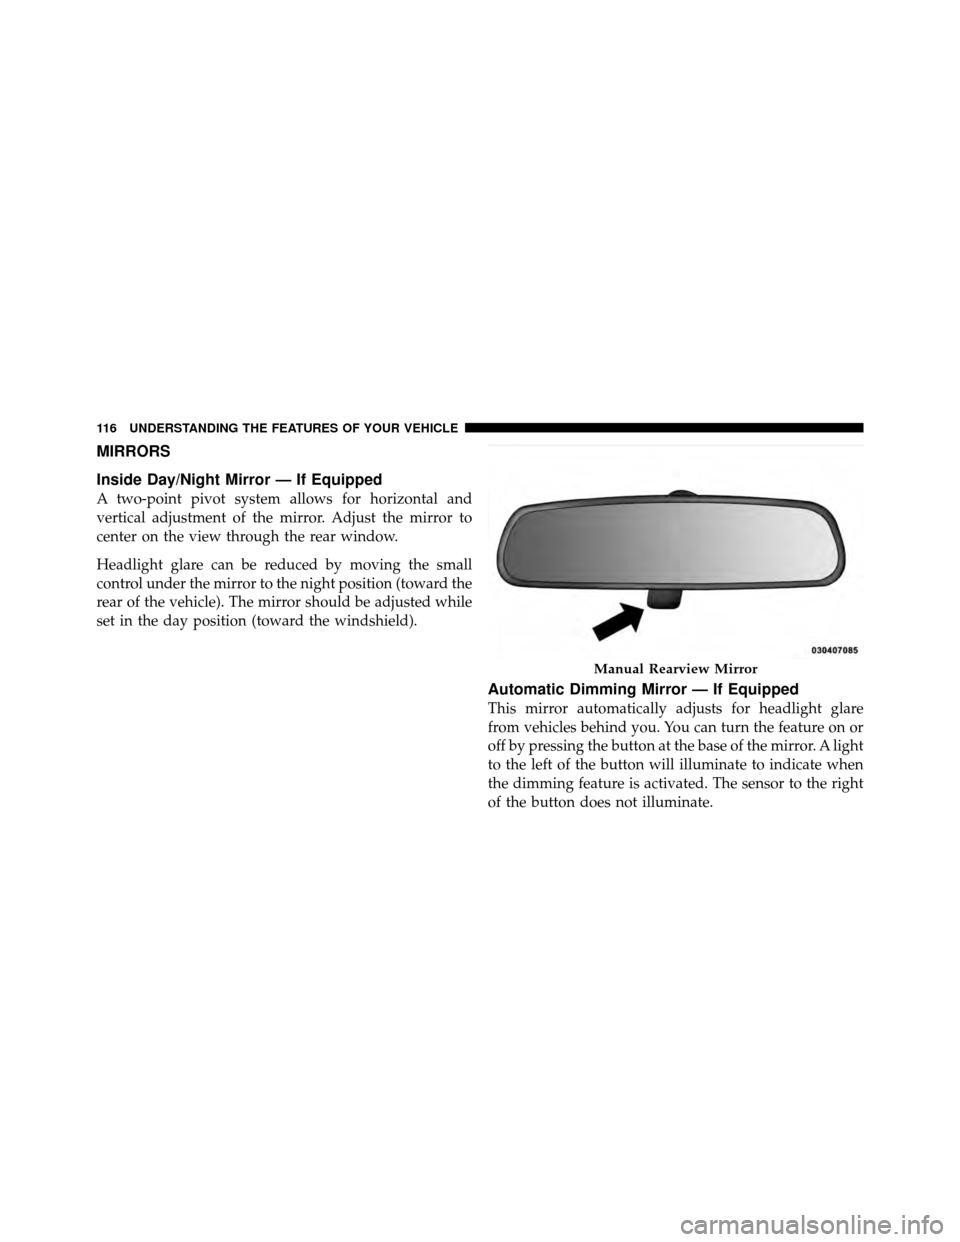 CHRYSLER TOWN AND COUNTRY 2012 5.G Owners Manual MIRRORS
Inside Day/Night Mirror — If Equipped
A two-point pivot system allows for horizontal and
vertical adjustment of the mirror. Adjust the mirror to
center on the view through the rear window.
H